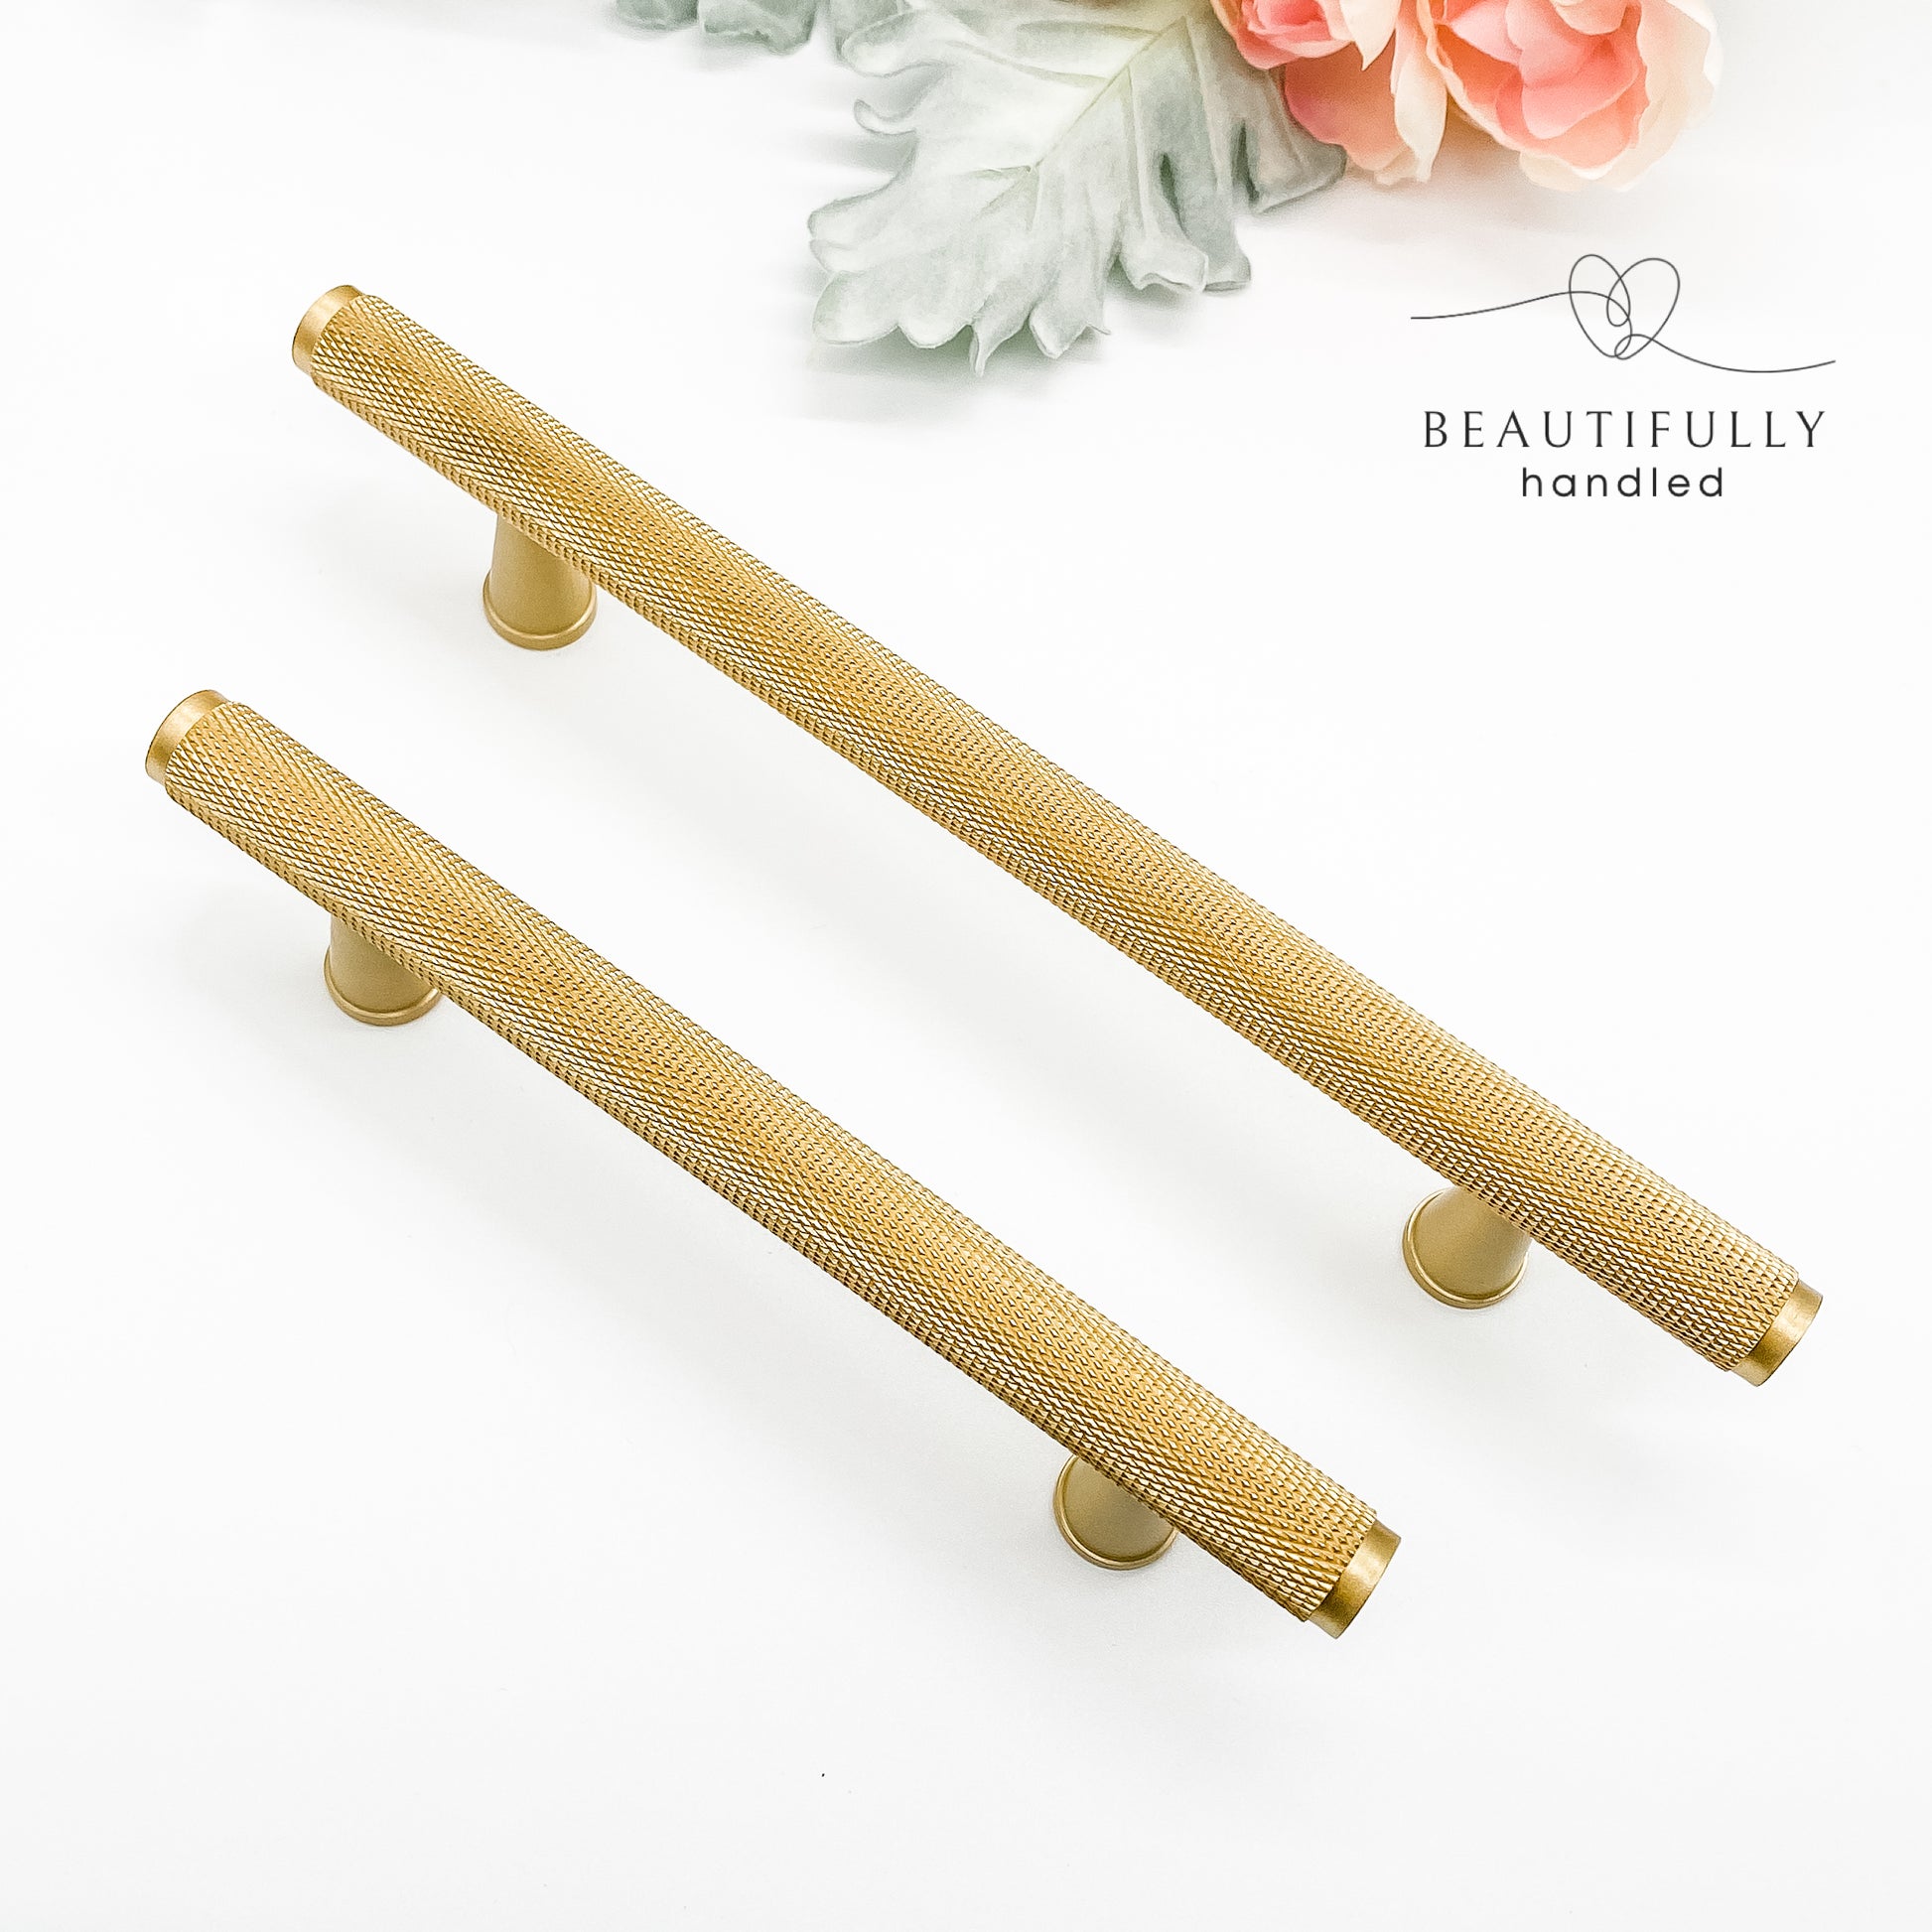 96mm and 128mm solid brass knurled kitchen drawer handle on plain white background